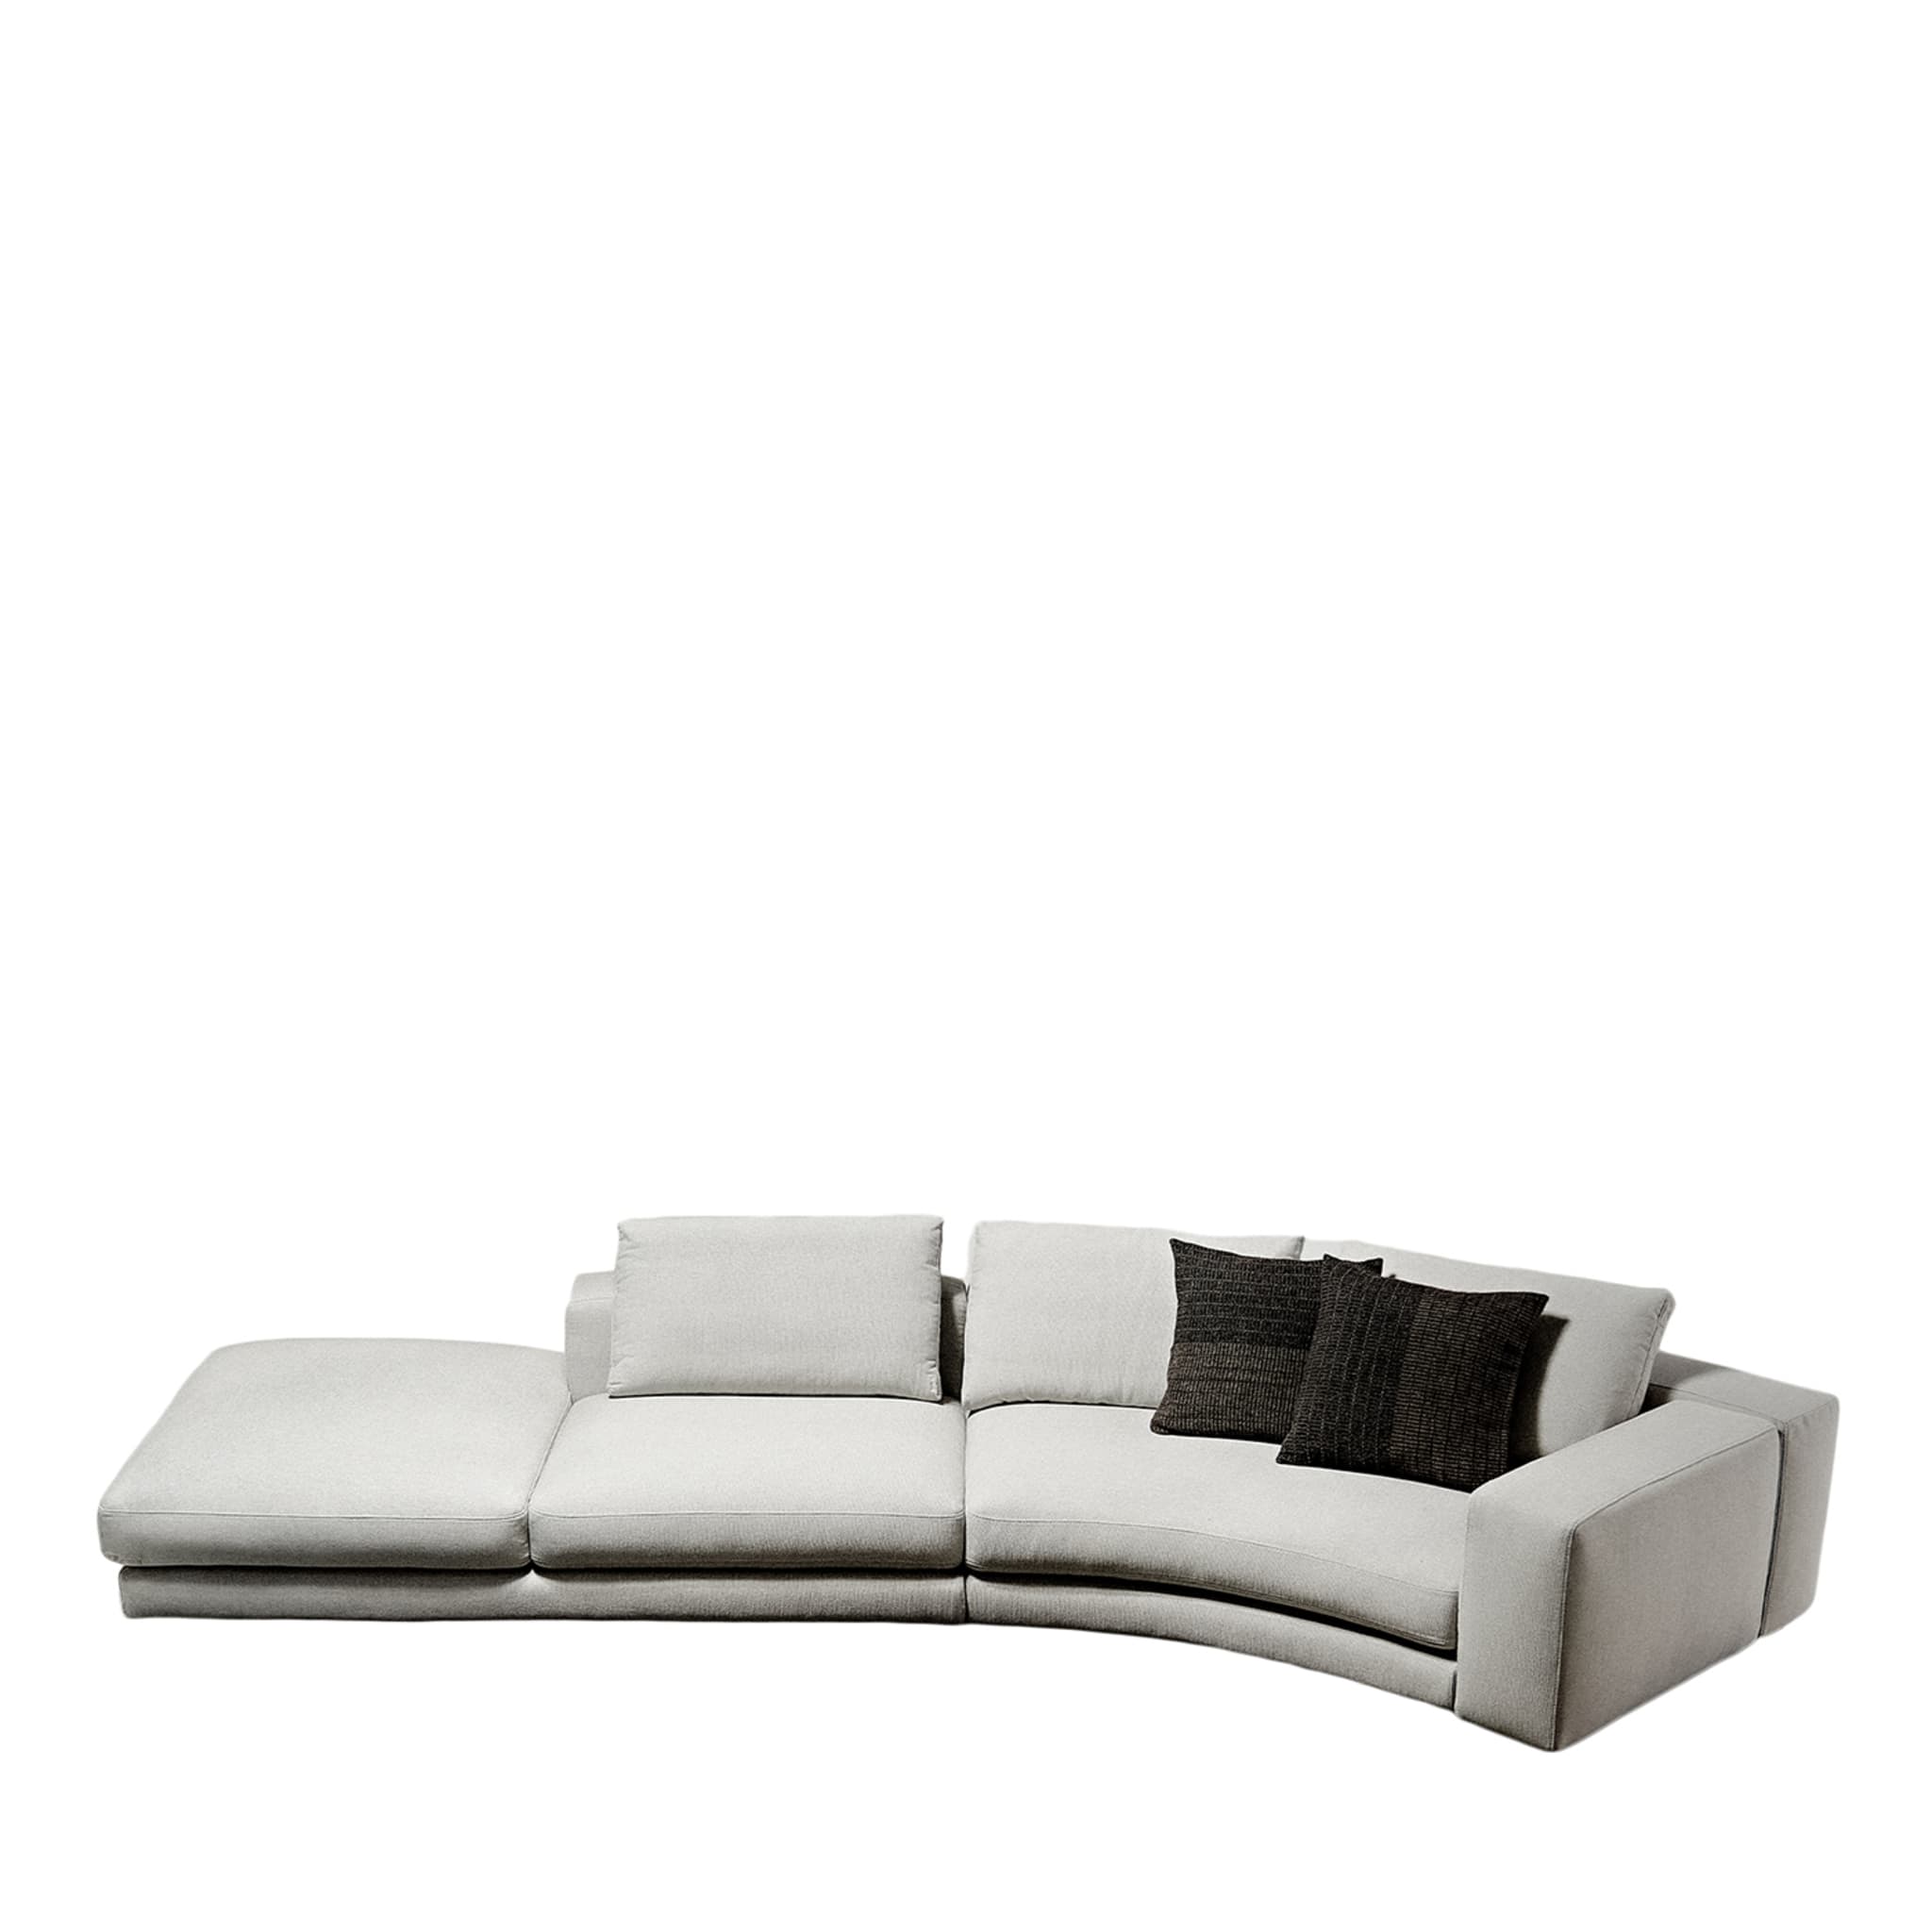 Rio Curved Modular Beige Sofa by Ludovica + Roberto Palomba - Main view